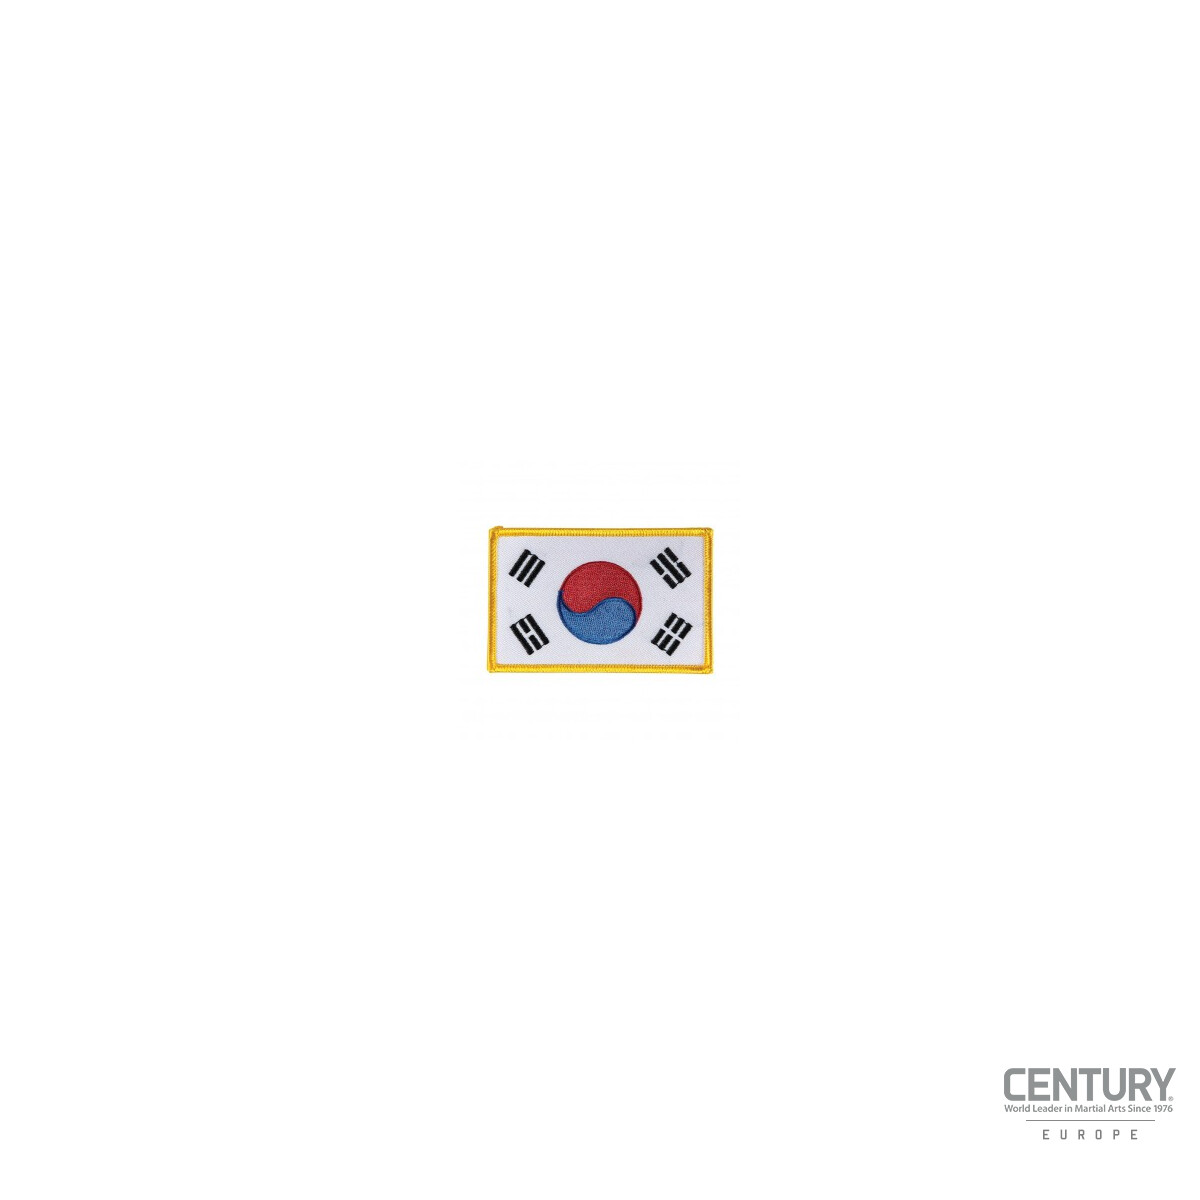 Country Flags Patch Korea - Golden Edge - 1